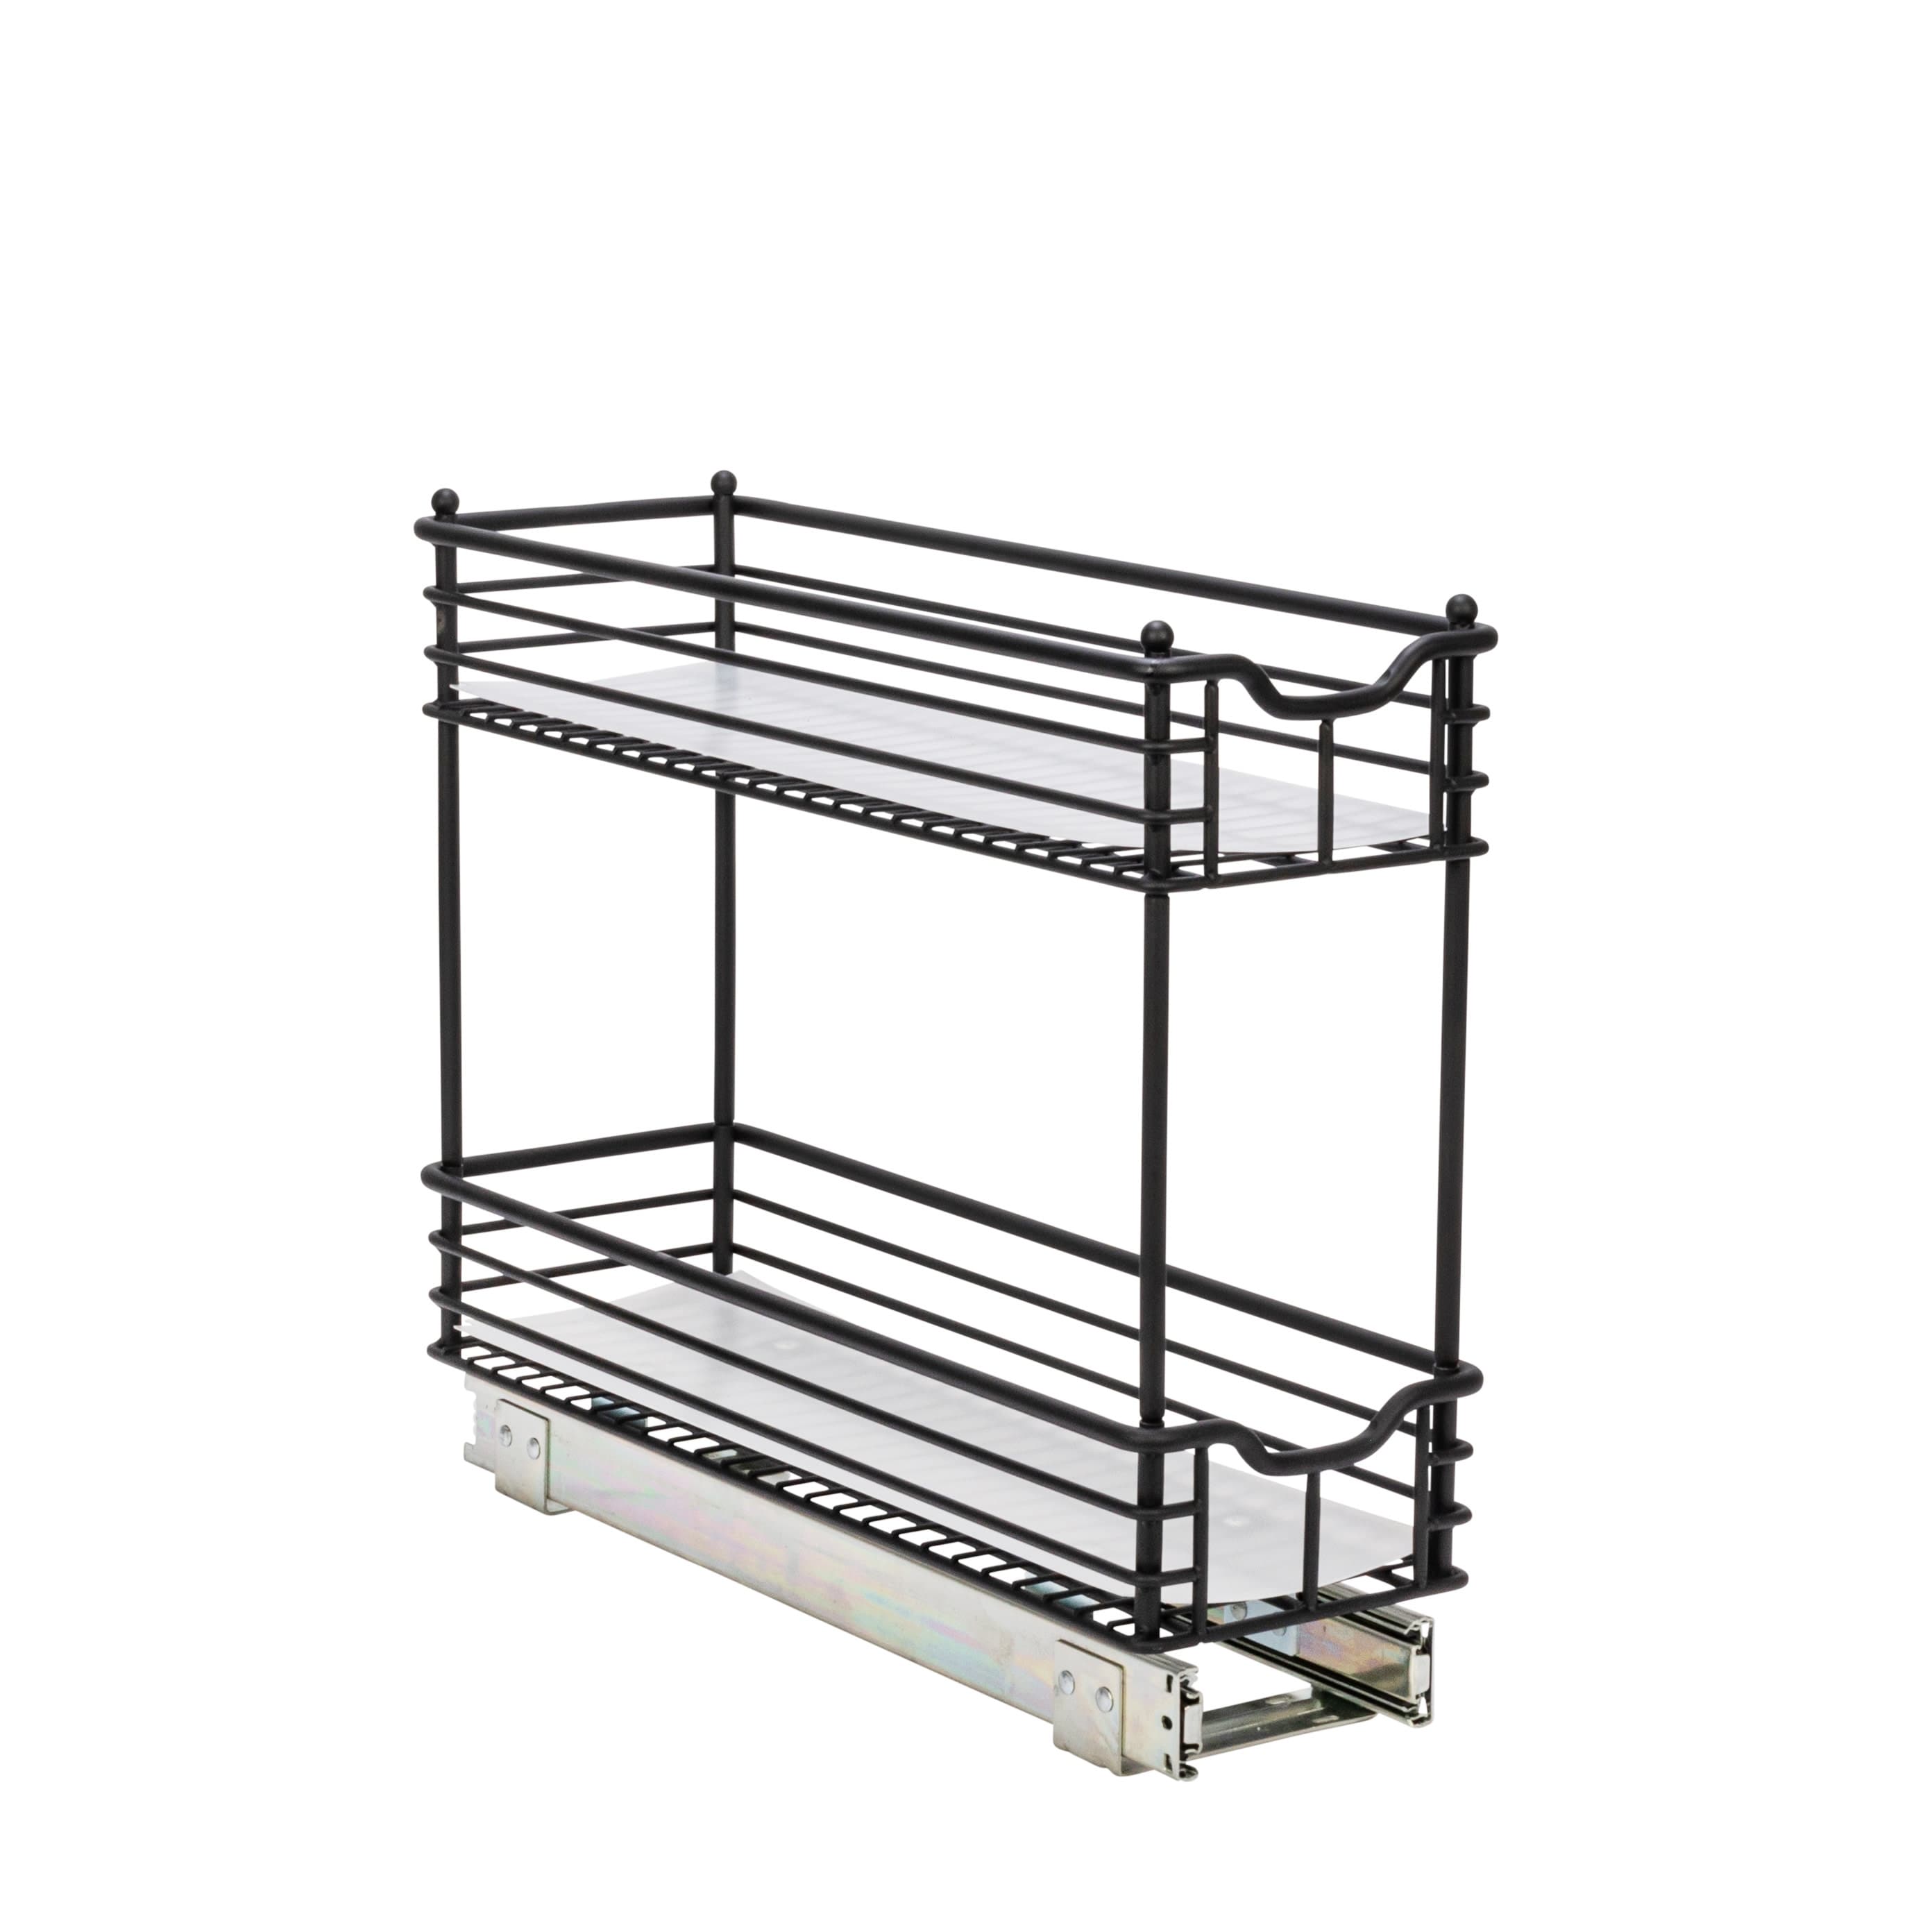 https://ak1.ostkcdn.com/images/products/is/images/direct/b4cc5e8d06789c0255d3465c1a16b839f4eafc05/Glidez-Pull-Out-Slide-Out-Storage-Organizer-with-Plastic-Liners---2-Tier-Design.jpg